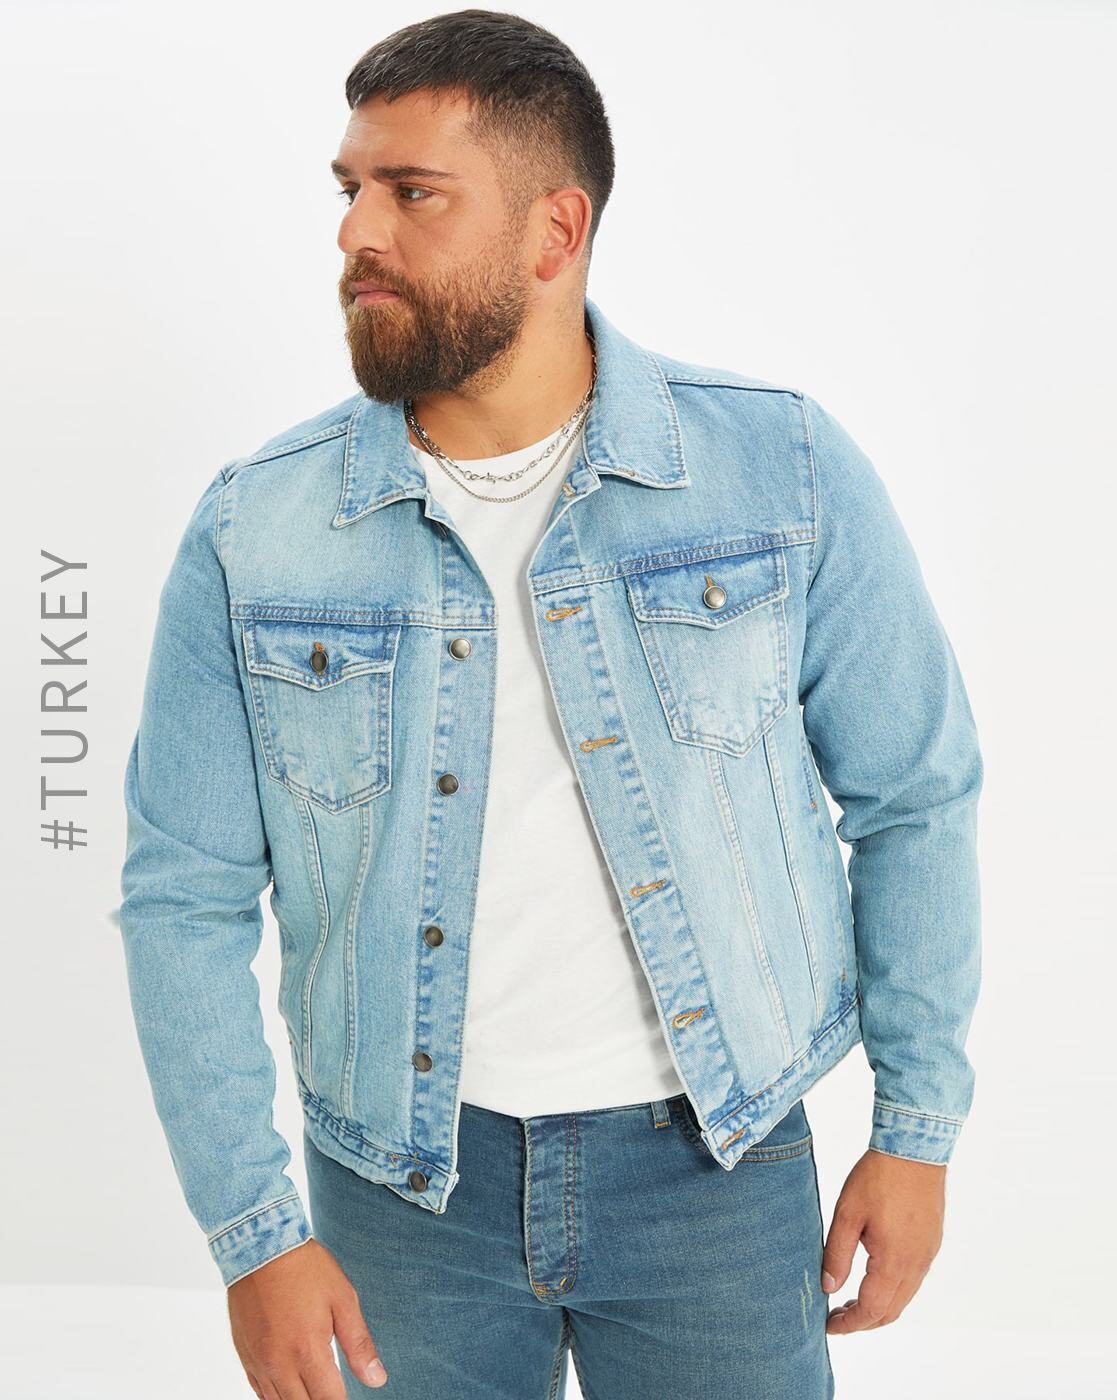 The Best Denim Jackets for Men to Buy Now and Own Forever | Gear Patrol